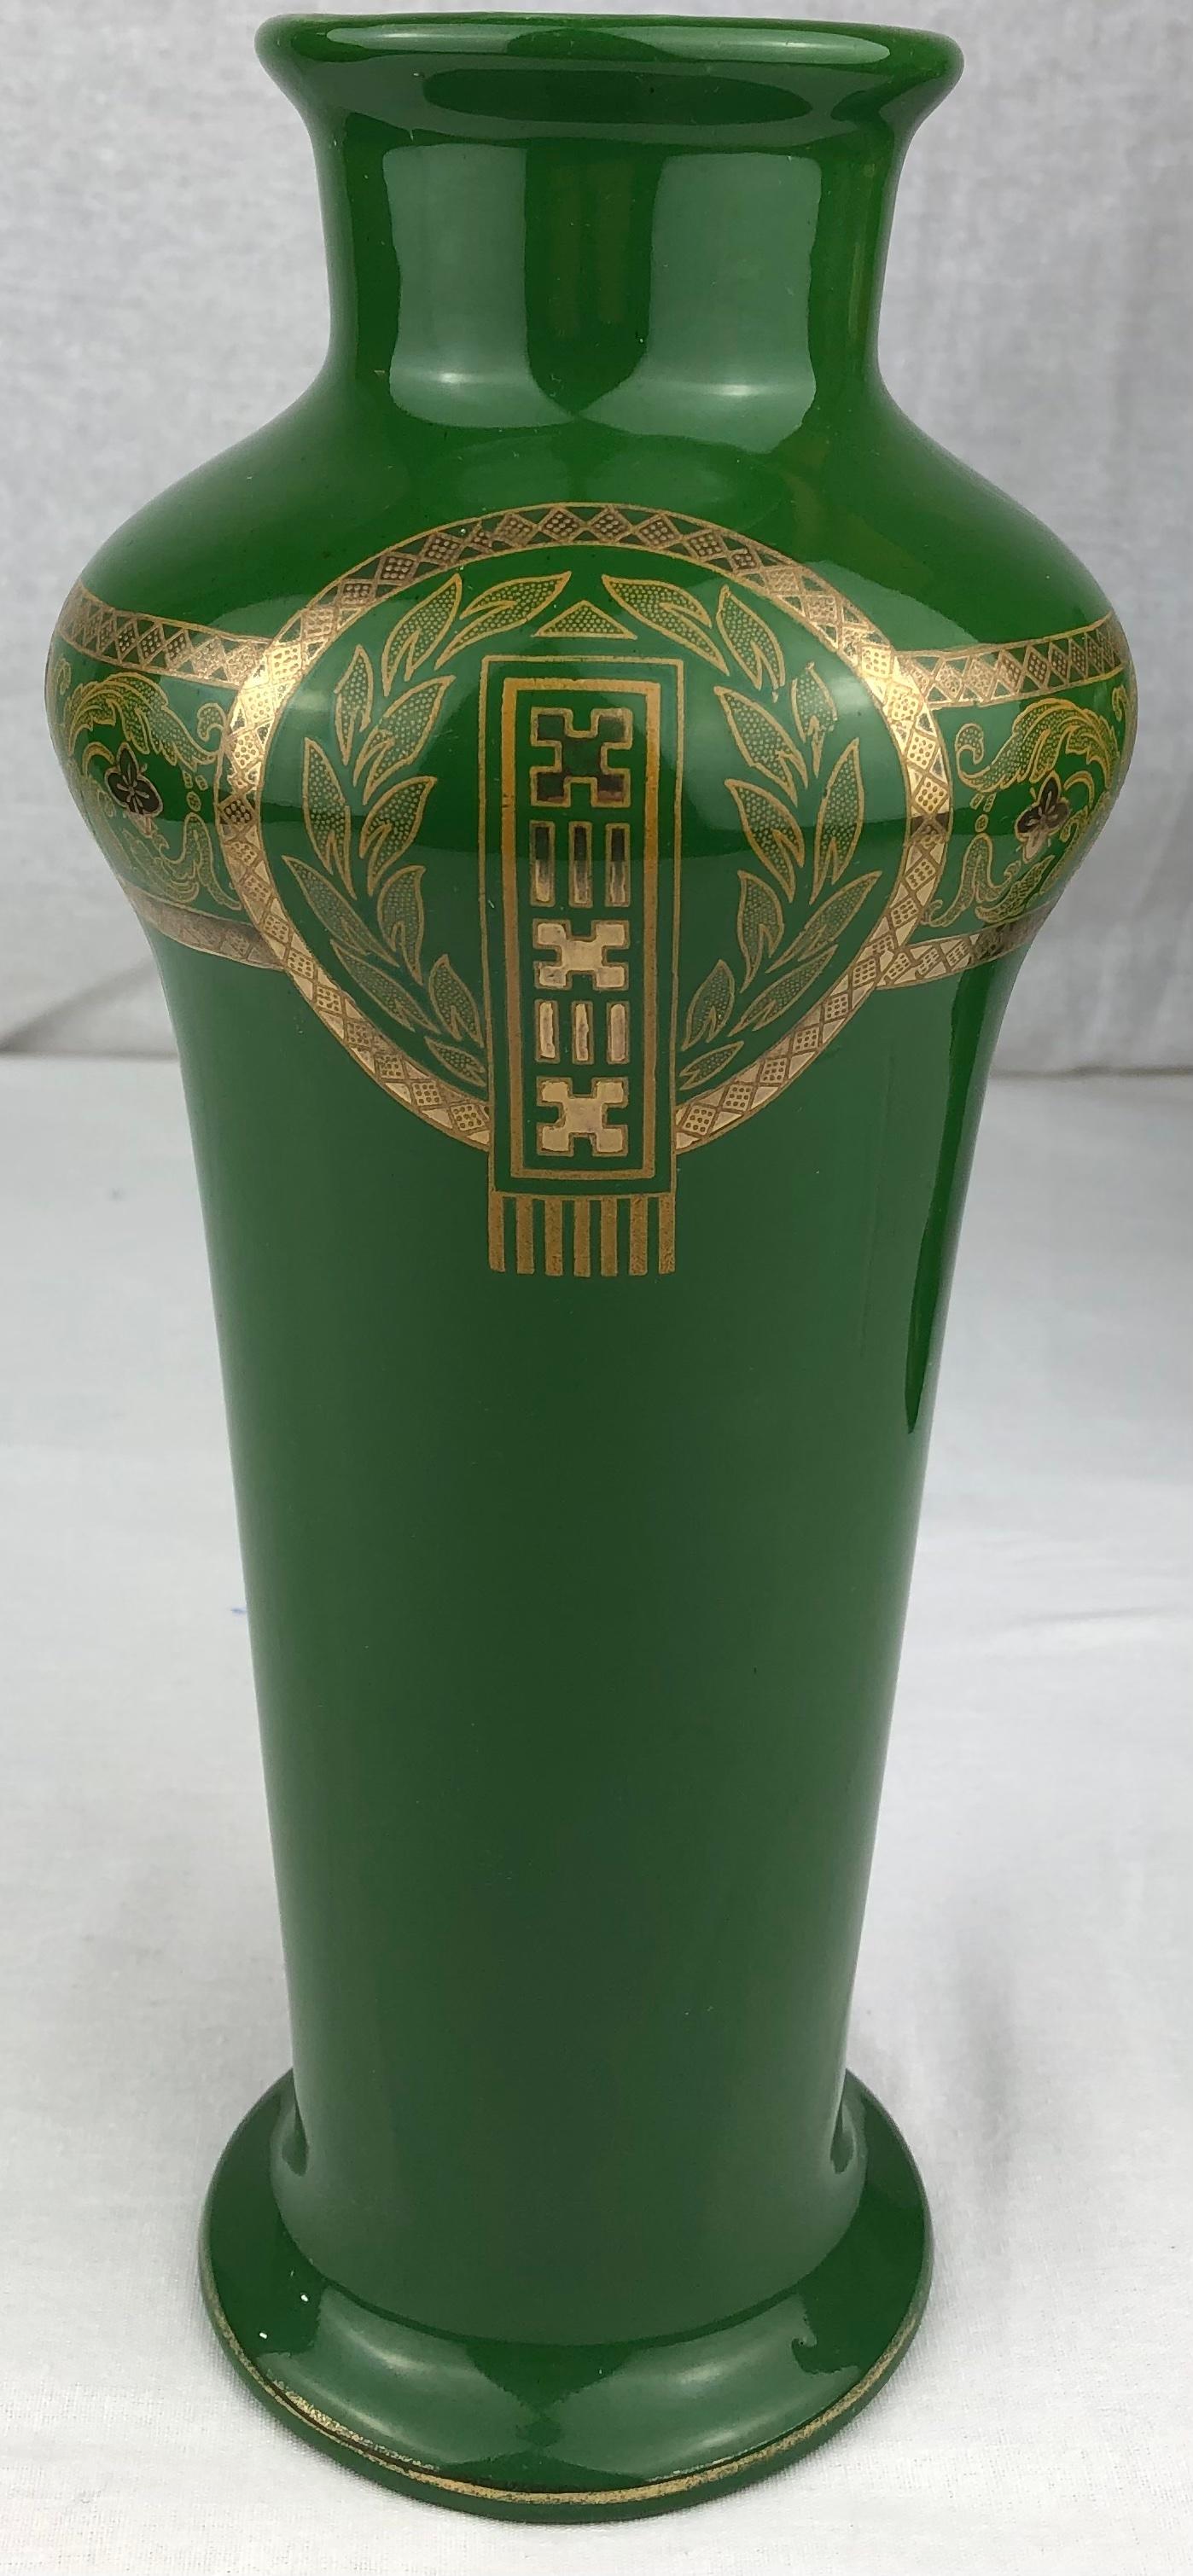 Pair of French Art Deco Porcelain Vases by Sarreguemines Green & Gold In Good Condition For Sale In Miami, FL